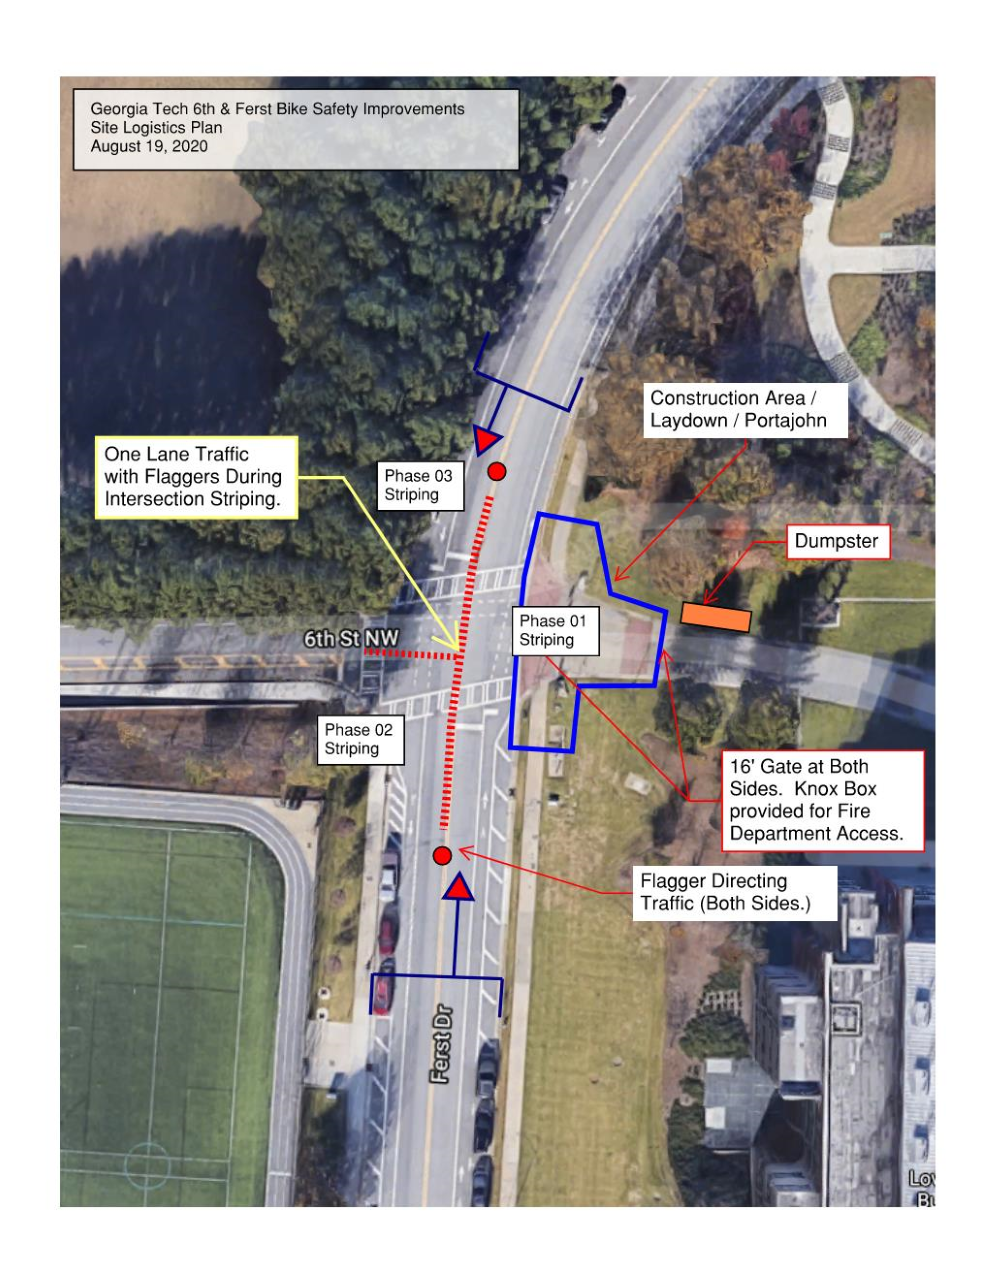 Road improvements for Ferst and 6th St.